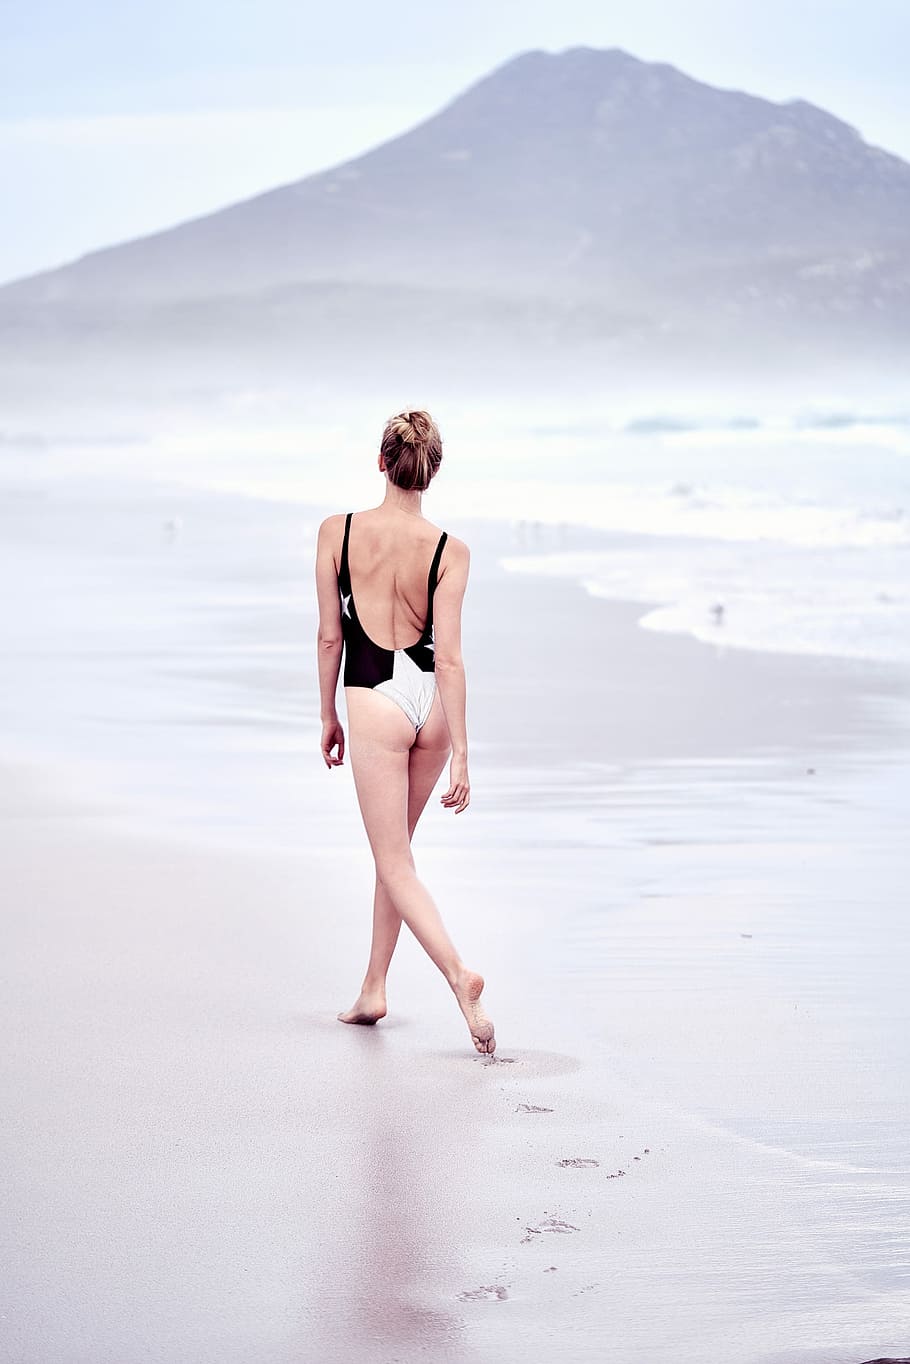 woman in one-piece swimsuit walking on seashore, woman wearing black and white one-piece swim suit